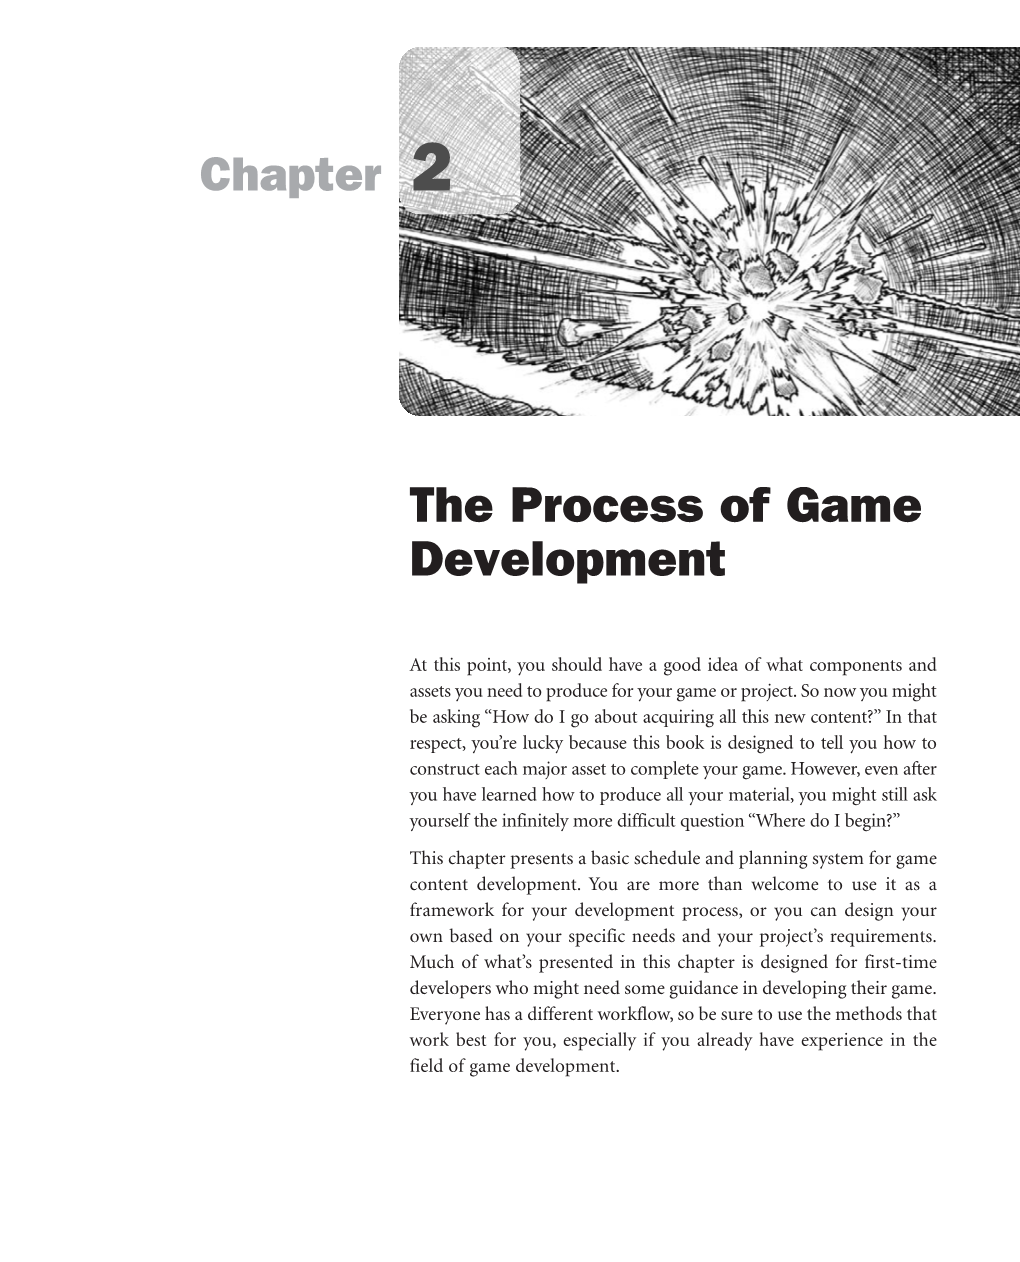 The Process of Game Development